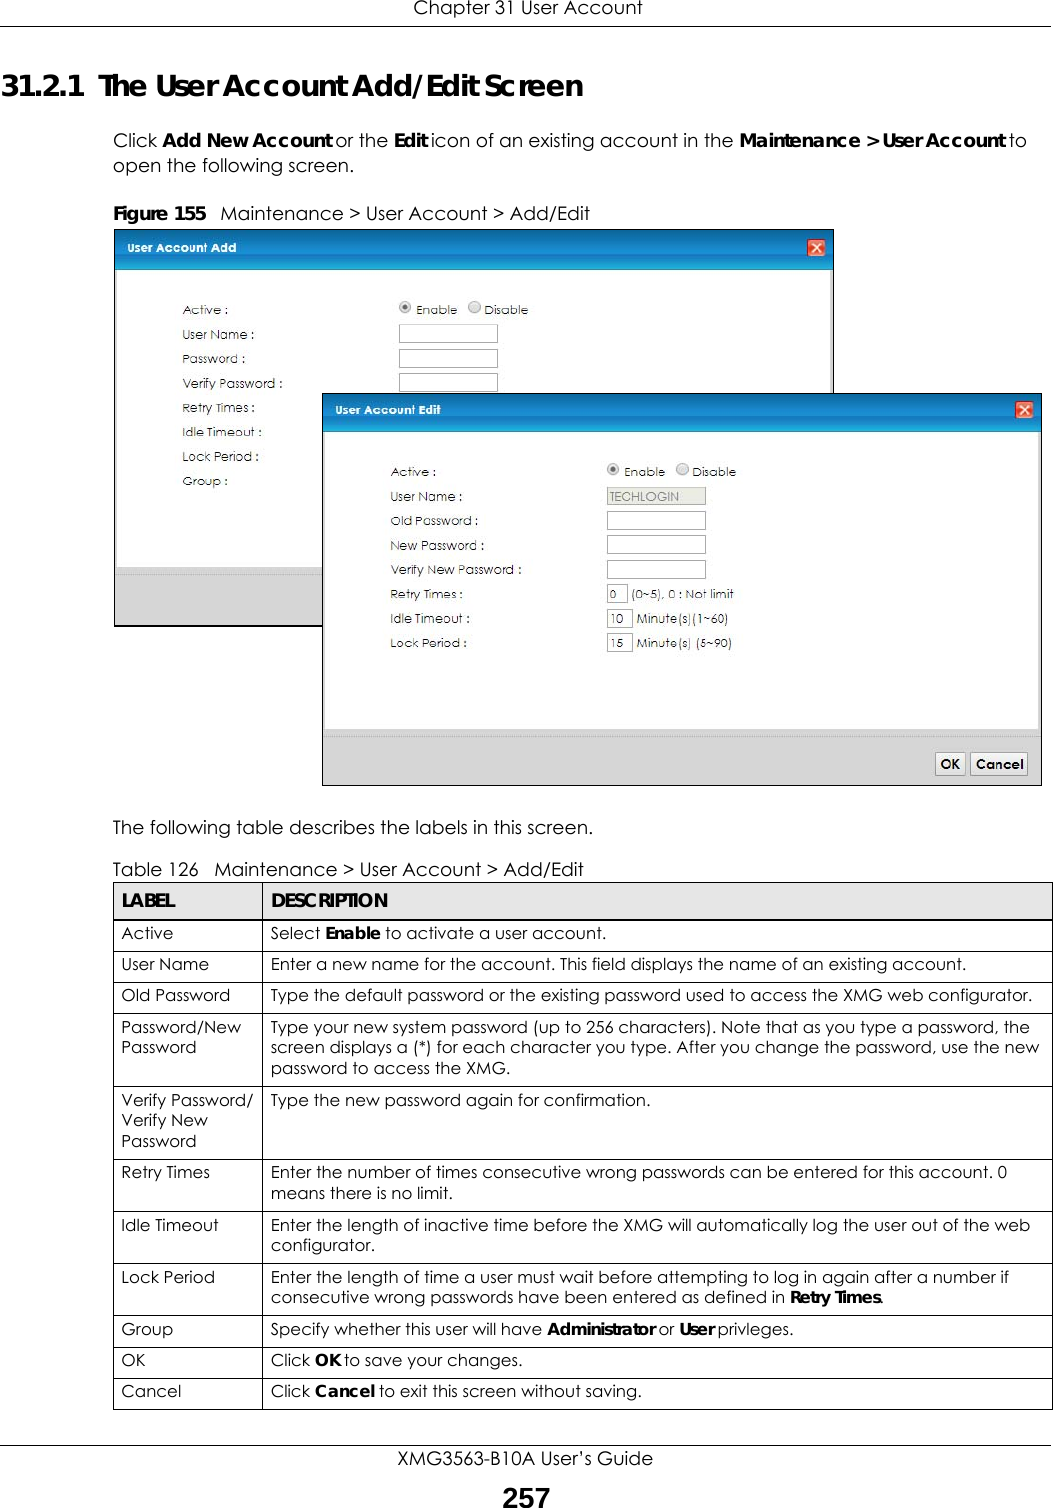  Chapter 31 User AccountXMG3563-B10A User’s Guide25731.2.1  The User Account Add/Edit ScreenClick Add New Account or the Edit icon of an existing account in the Maintenance &gt; User Account to open the following screen.Figure 155   Maintenance &gt; User Account &gt; Add/EditThe following table describes the labels in this screen. Table 126   Maintenance &gt; User Account &gt; Add/EditLABEL DESCRIPTIONActive Select Enable to activate a user account.User Name Enter a new name for the account. This field displays the name of an existing account. Old Password Type the default password or the existing password used to access the XMG web configurator.Password/New PasswordType your new system password (up to 256 characters). Note that as you type a password, the screen displays a (*) for each character you type. After you change the password, use the new password to access the XMG.Verify Password/Verify New PasswordType the new password again for confirmation.Retry Times Enter the number of times consecutive wrong passwords can be entered for this account. 0 means there is no limit.Idle Timeout Enter the length of inactive time before the XMG will automatically log the user out of the web configurator.  Lock Period Enter the length of time a user must wait before attempting to log in again after a number if consecutive wrong passwords have been entered as defined in Retry Times.Group Specify whether this user will have Administrator or User privleges.OK Click OK to save your changes.Cancel Click Cancel to exit this screen without saving.